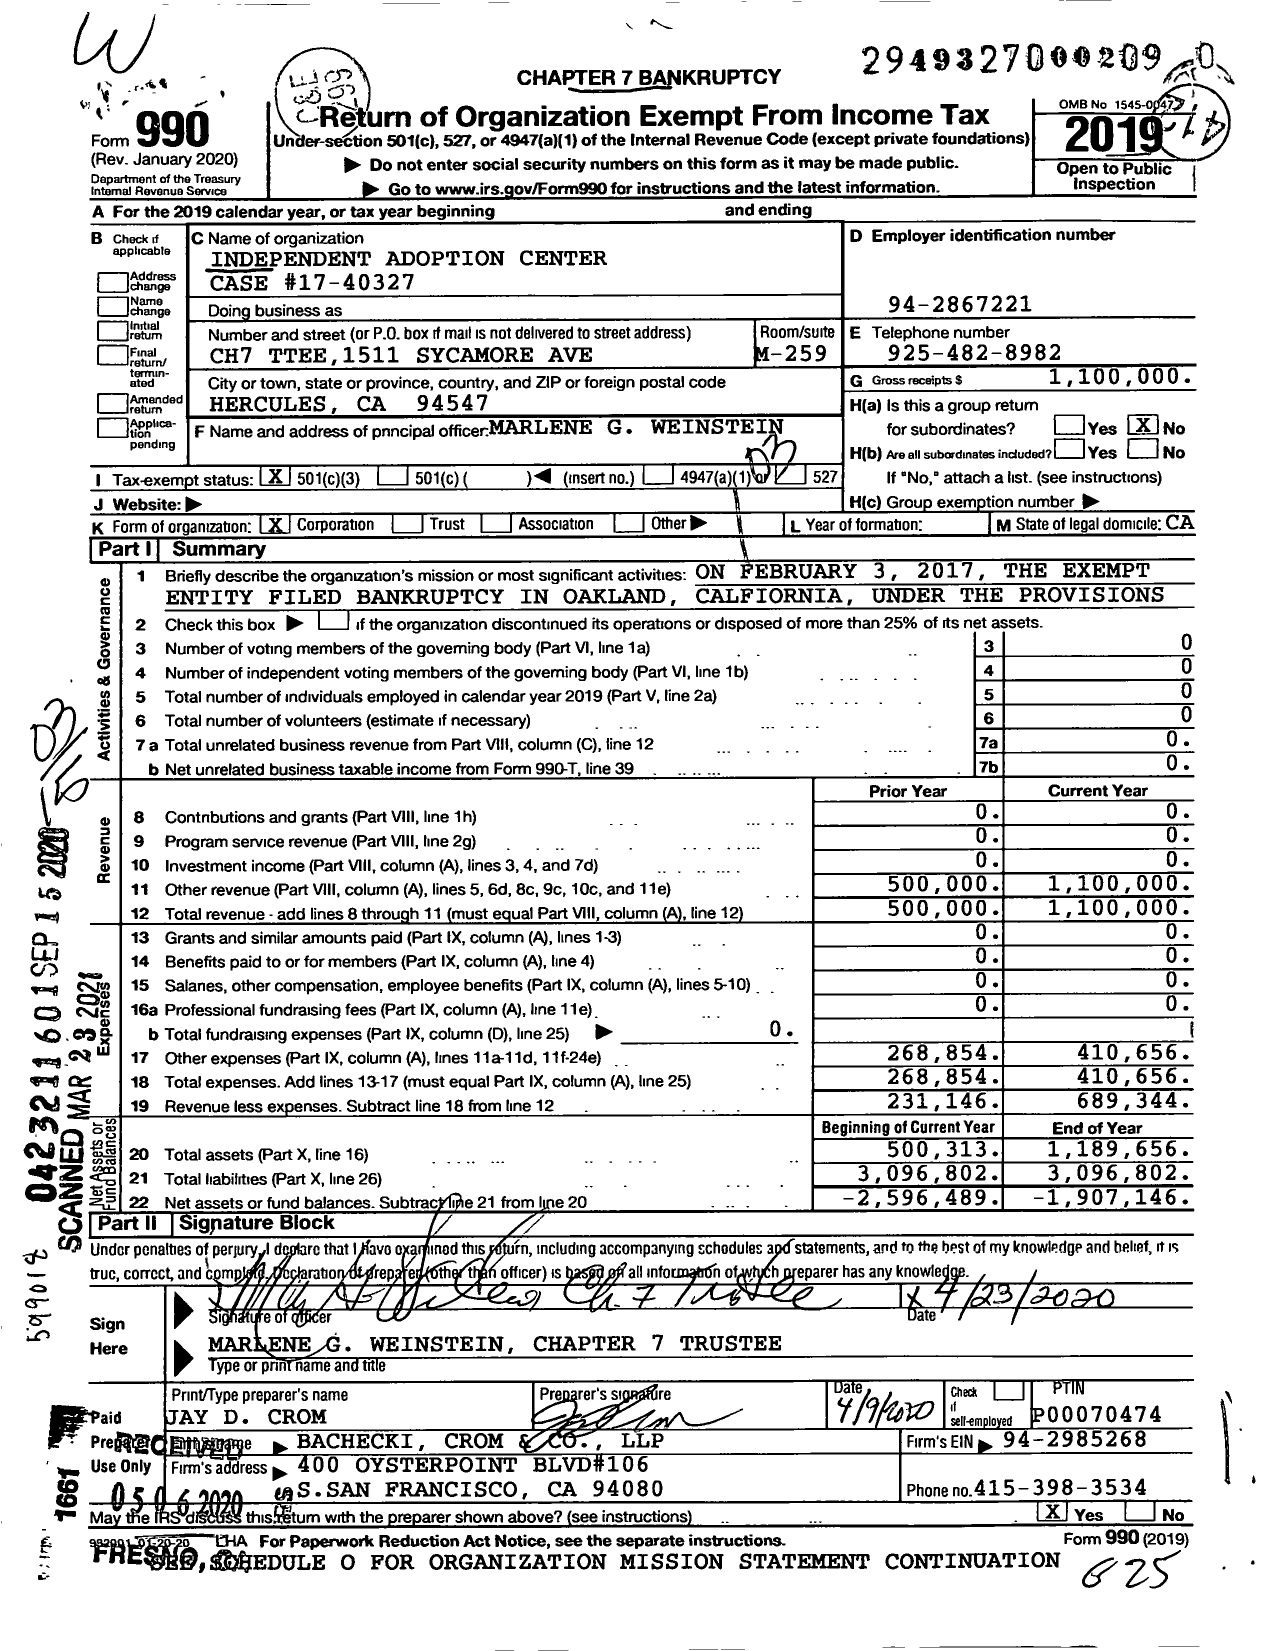 Image of first page of 2019 Form 990 for Independent Adoption Center Case #17-40327